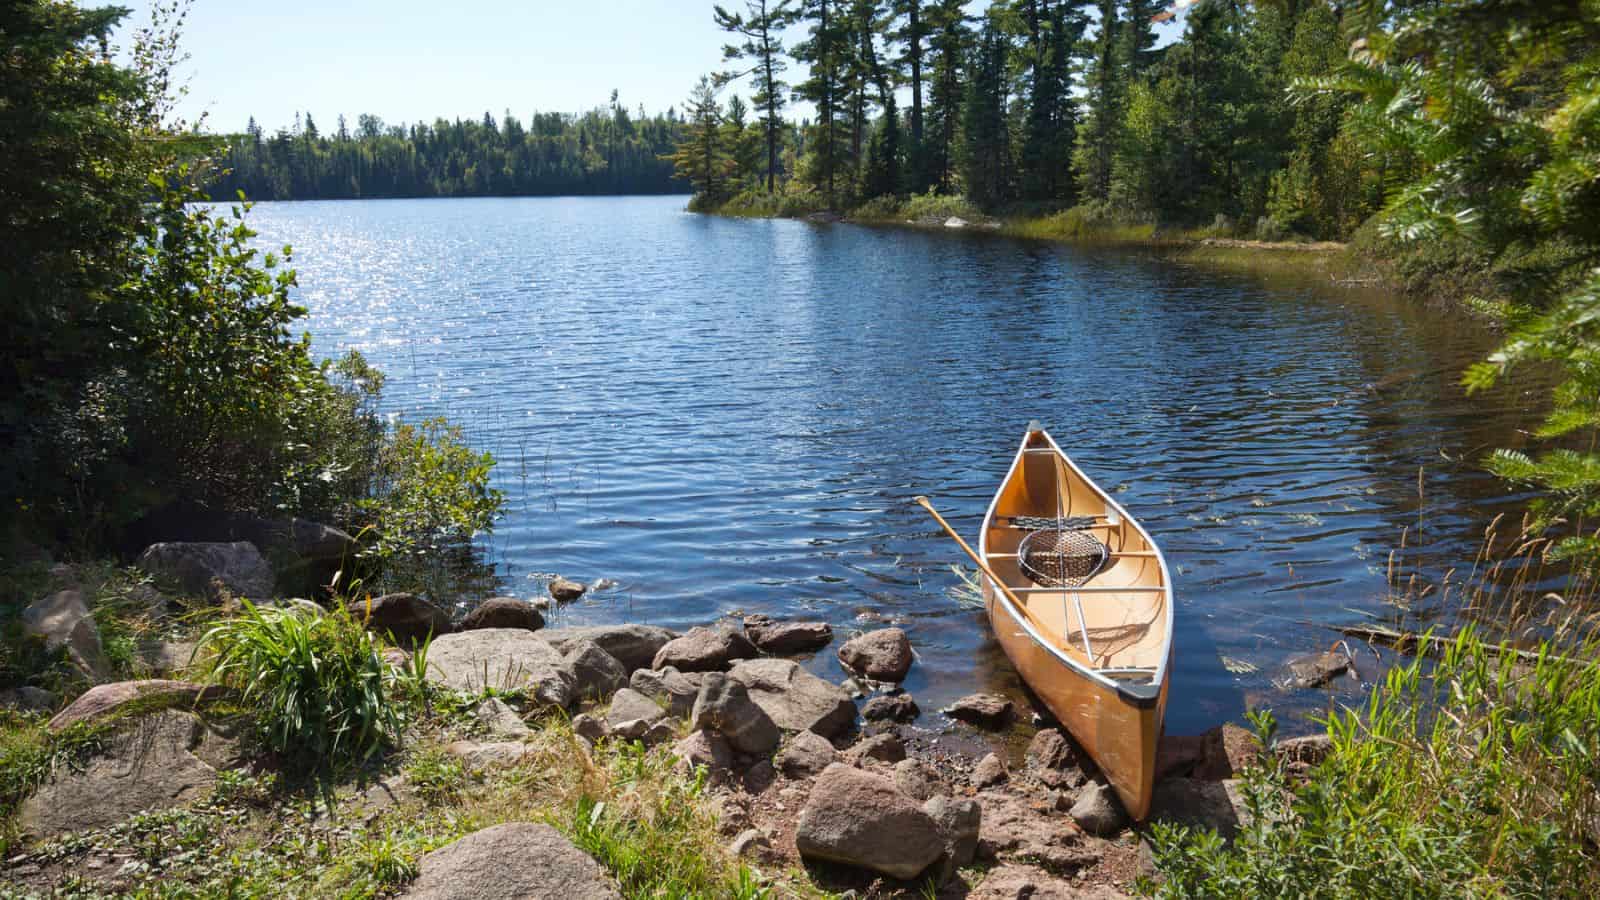 <p>If you’re looking for a unique kayaking experience, you can’t go wrong with the Boundary Waters Canoe Area Wilderness in Minnesota. With over 1,100 lakes and 1,500 miles of canoe routes, this vast wilderness area is perfect for multi-day kayaking trips.</p> <p>As you paddle through the crystal clear waters, keep your eyes peeled for the area’s abundant wildlife, including moose and bears. And don’t forget to obtain the necessary permit before embarking on your journey.</p> <p>If you don’t have your own kayak, don’t worry – there are plenty of rental options available in the area. Just be sure to factor in the cost of a rental when planning your trip.</p>